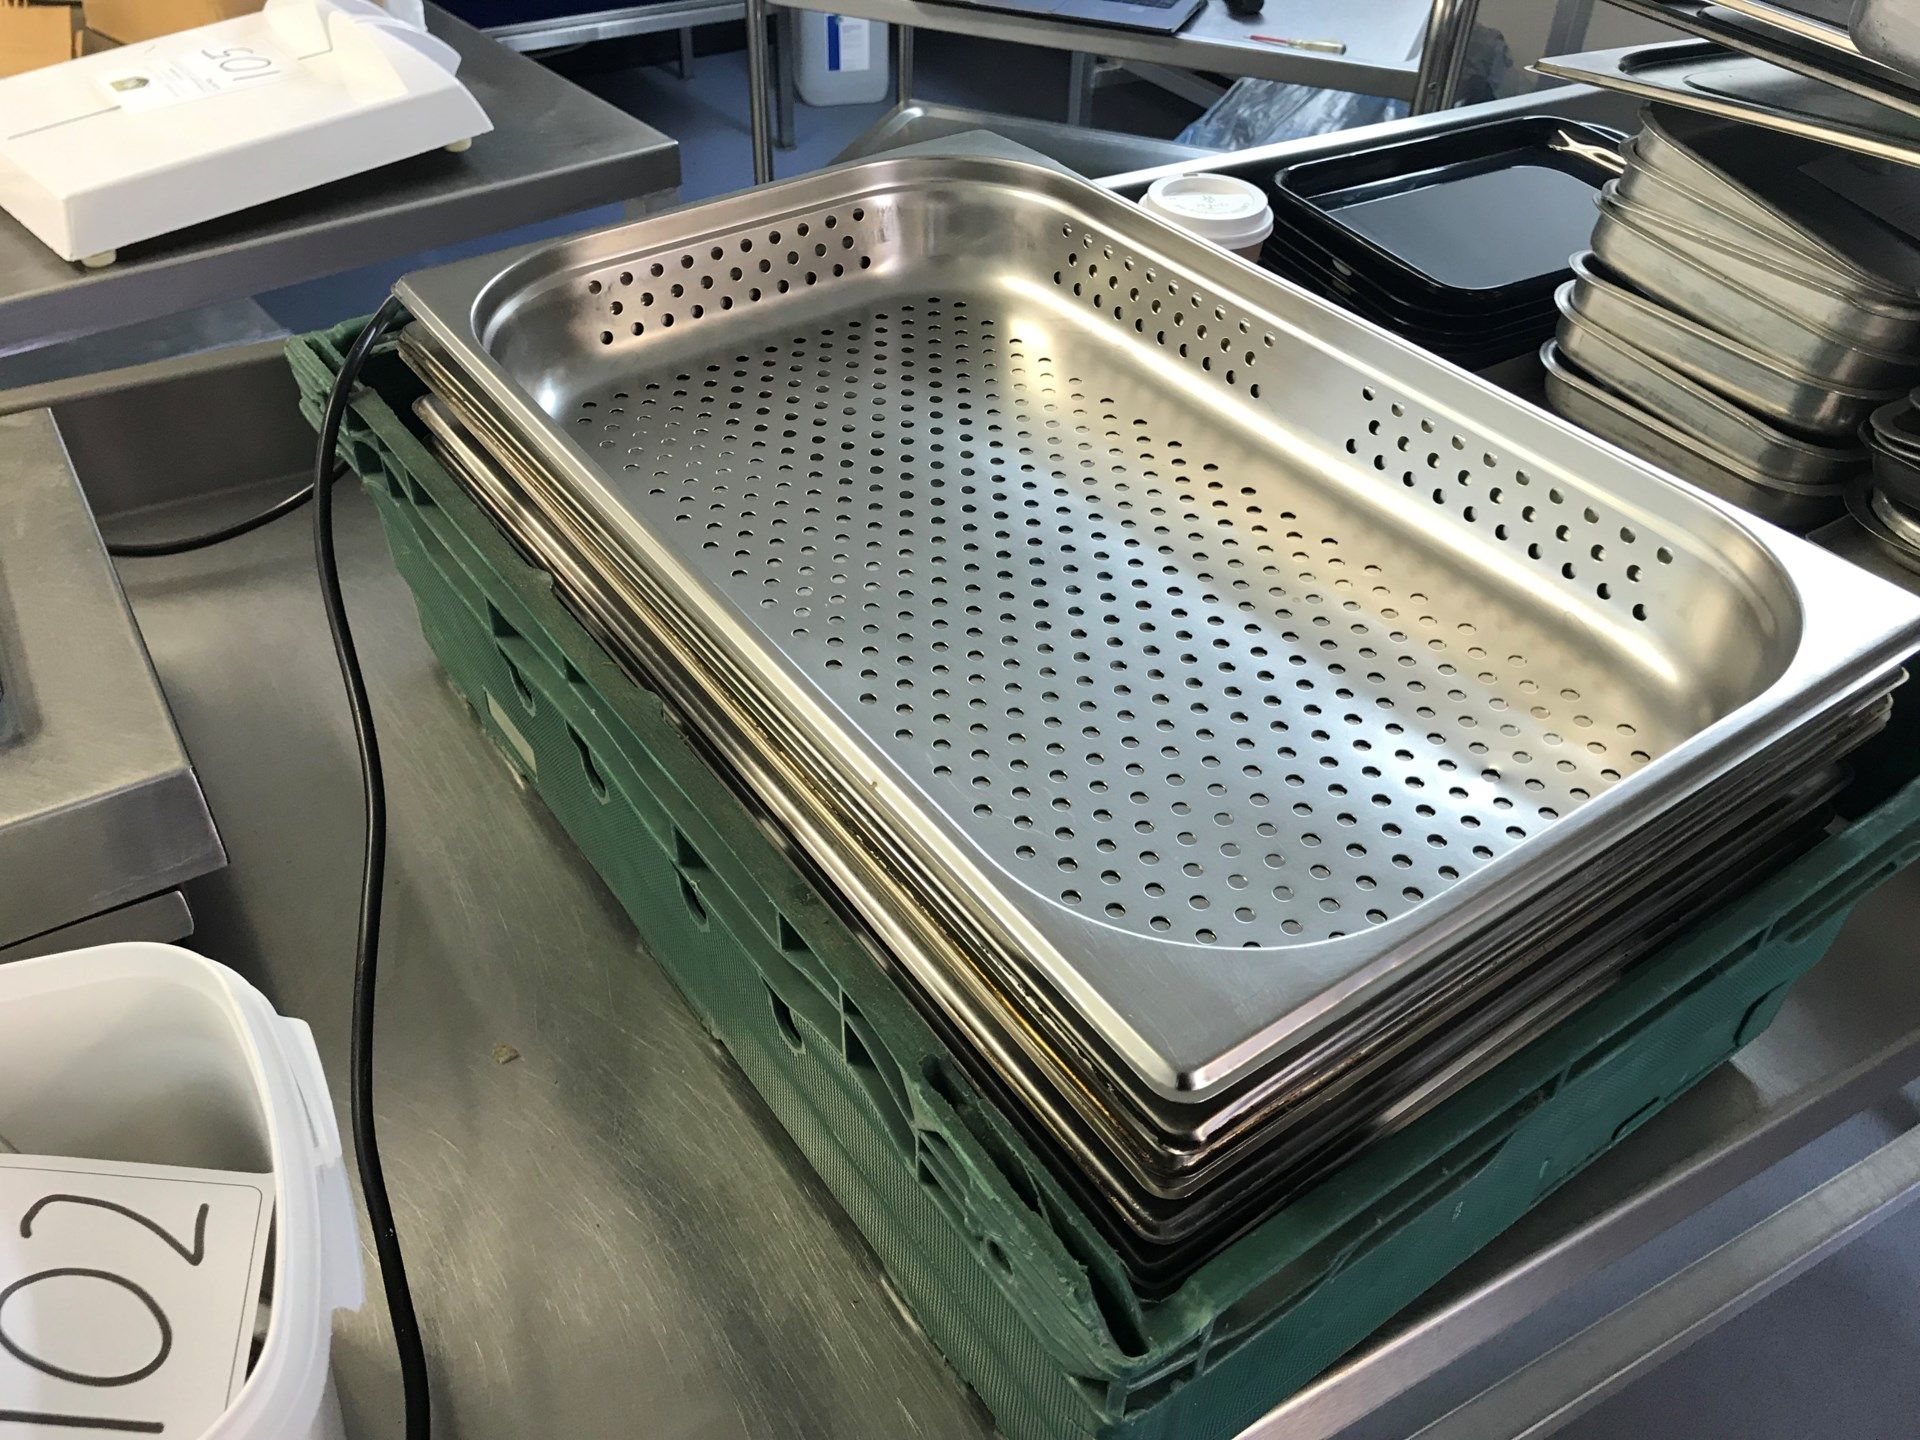 Stainless Steel Gastronomes, Stainless Steel Baking Trays and Lids